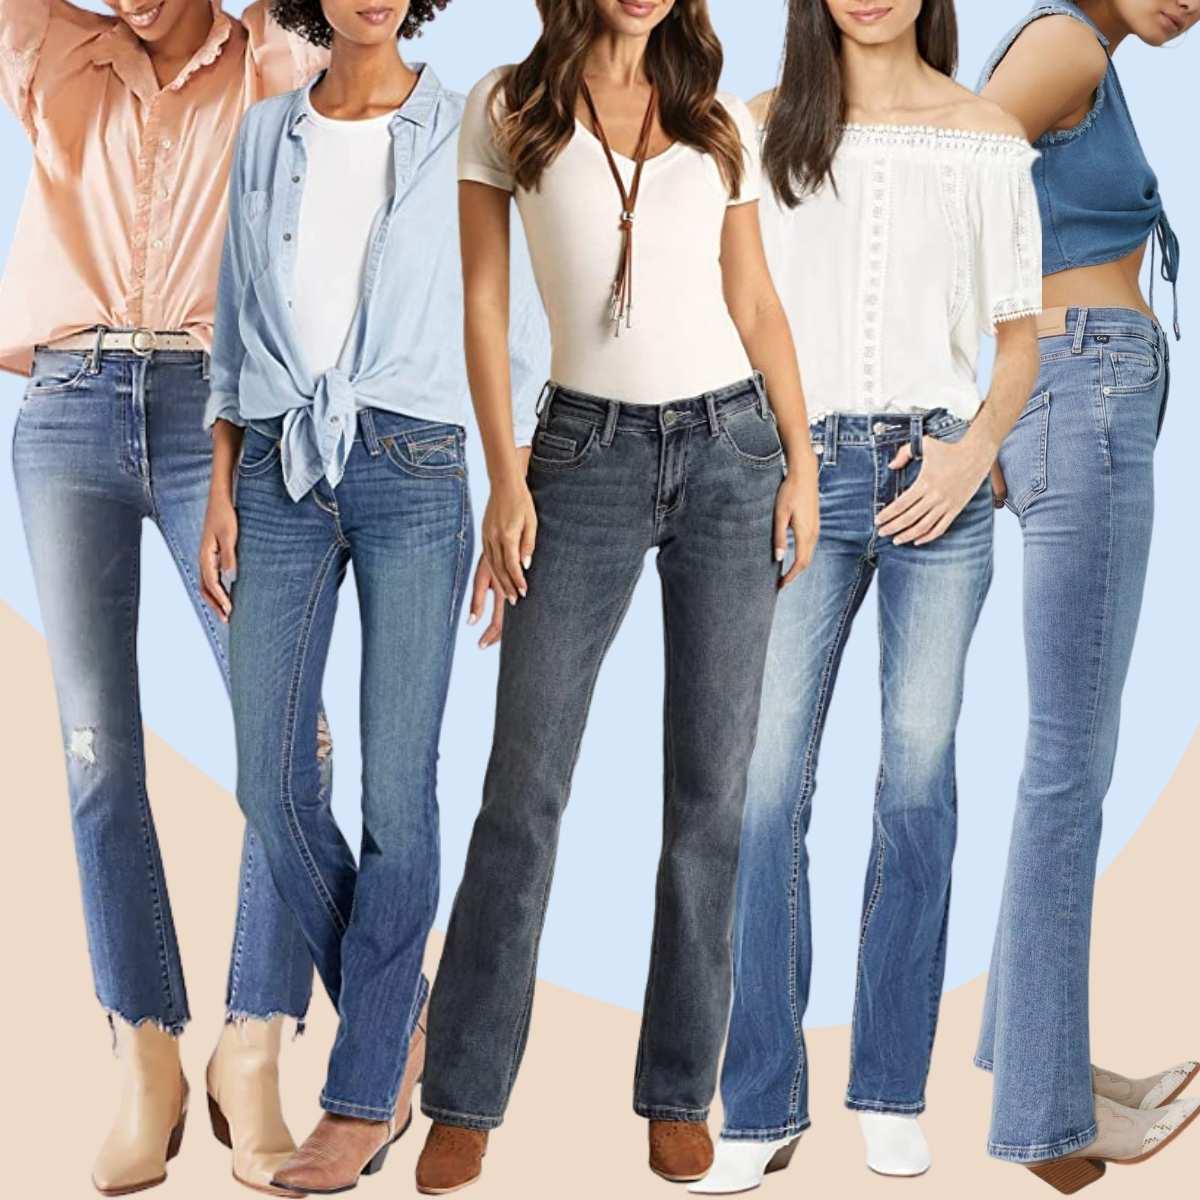 Collage of 4 women wearing pointed toe ankle boots and bootcut jeans outfits.